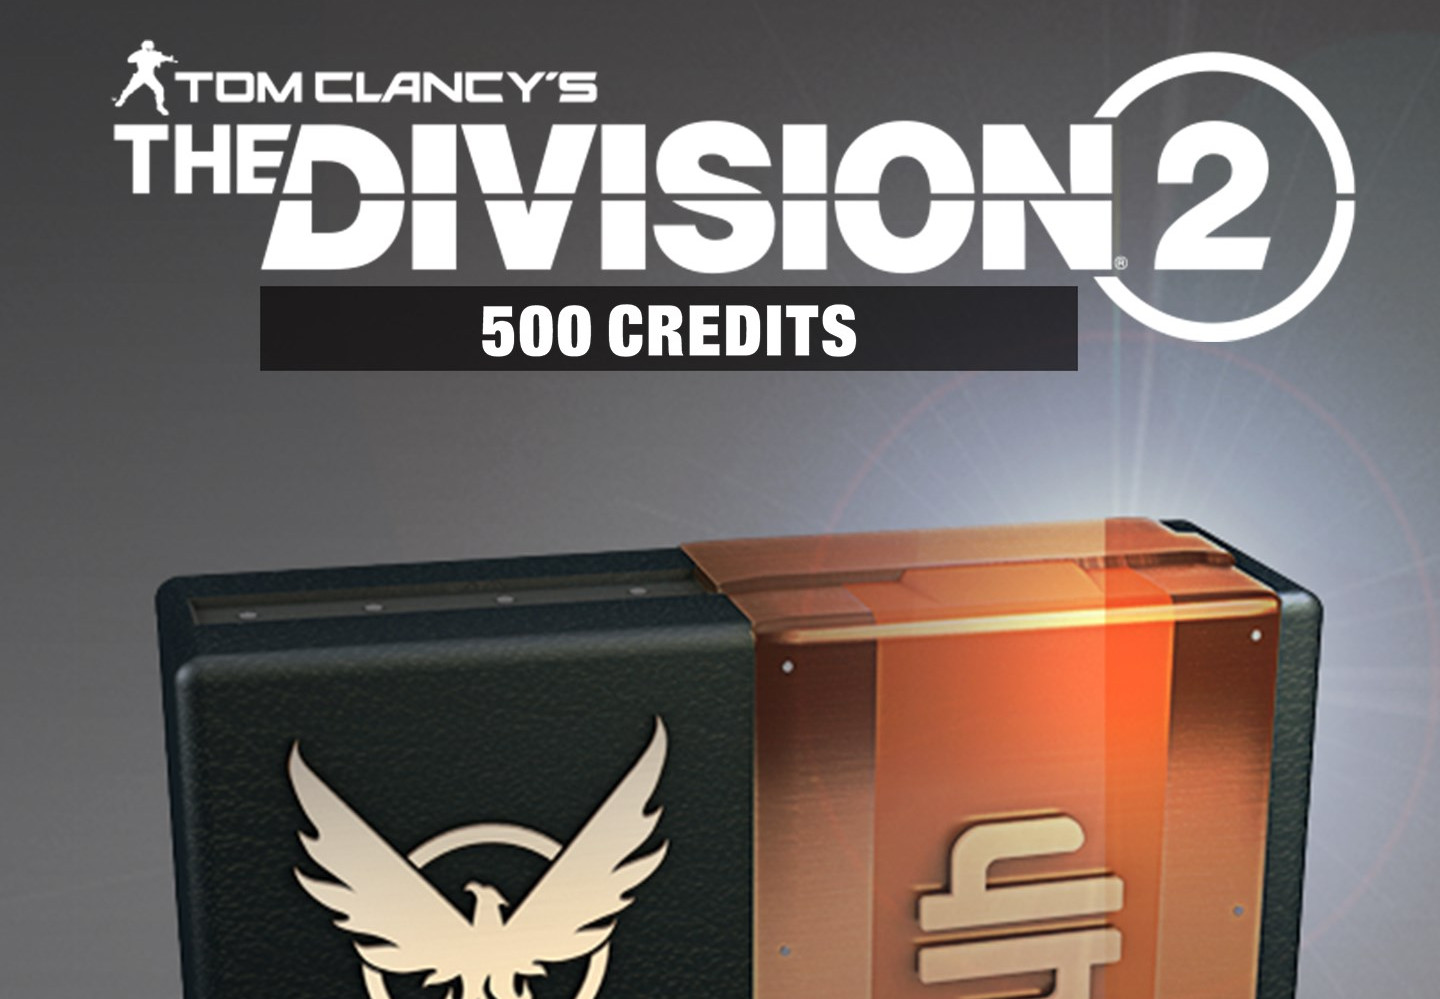 Tom Clancy's The Division 2 - 500 Premium Credits Pack XBOX One / Xbox Series X,S CD Key